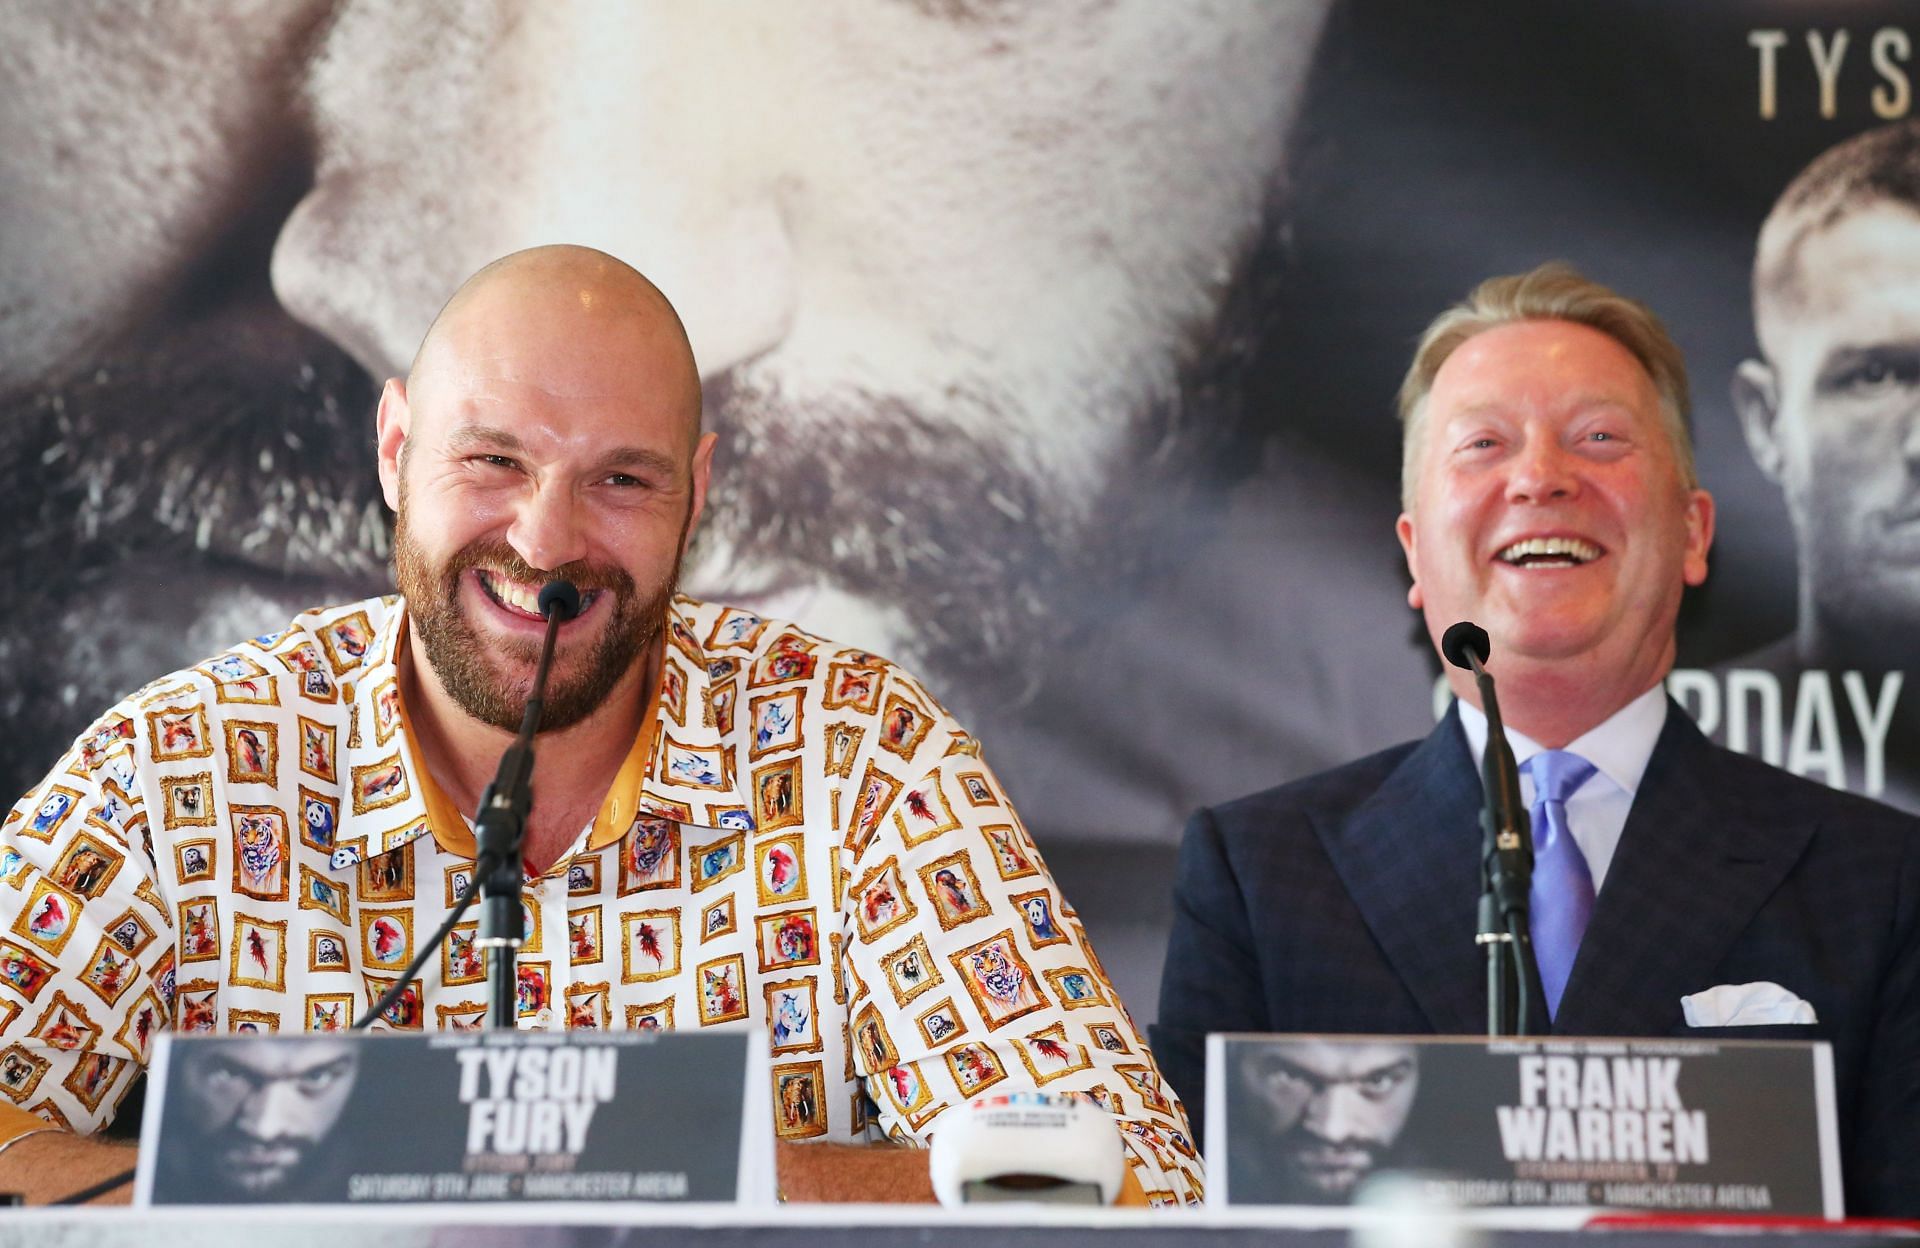 Tyson Fury and Frank Warren during a Press Conference